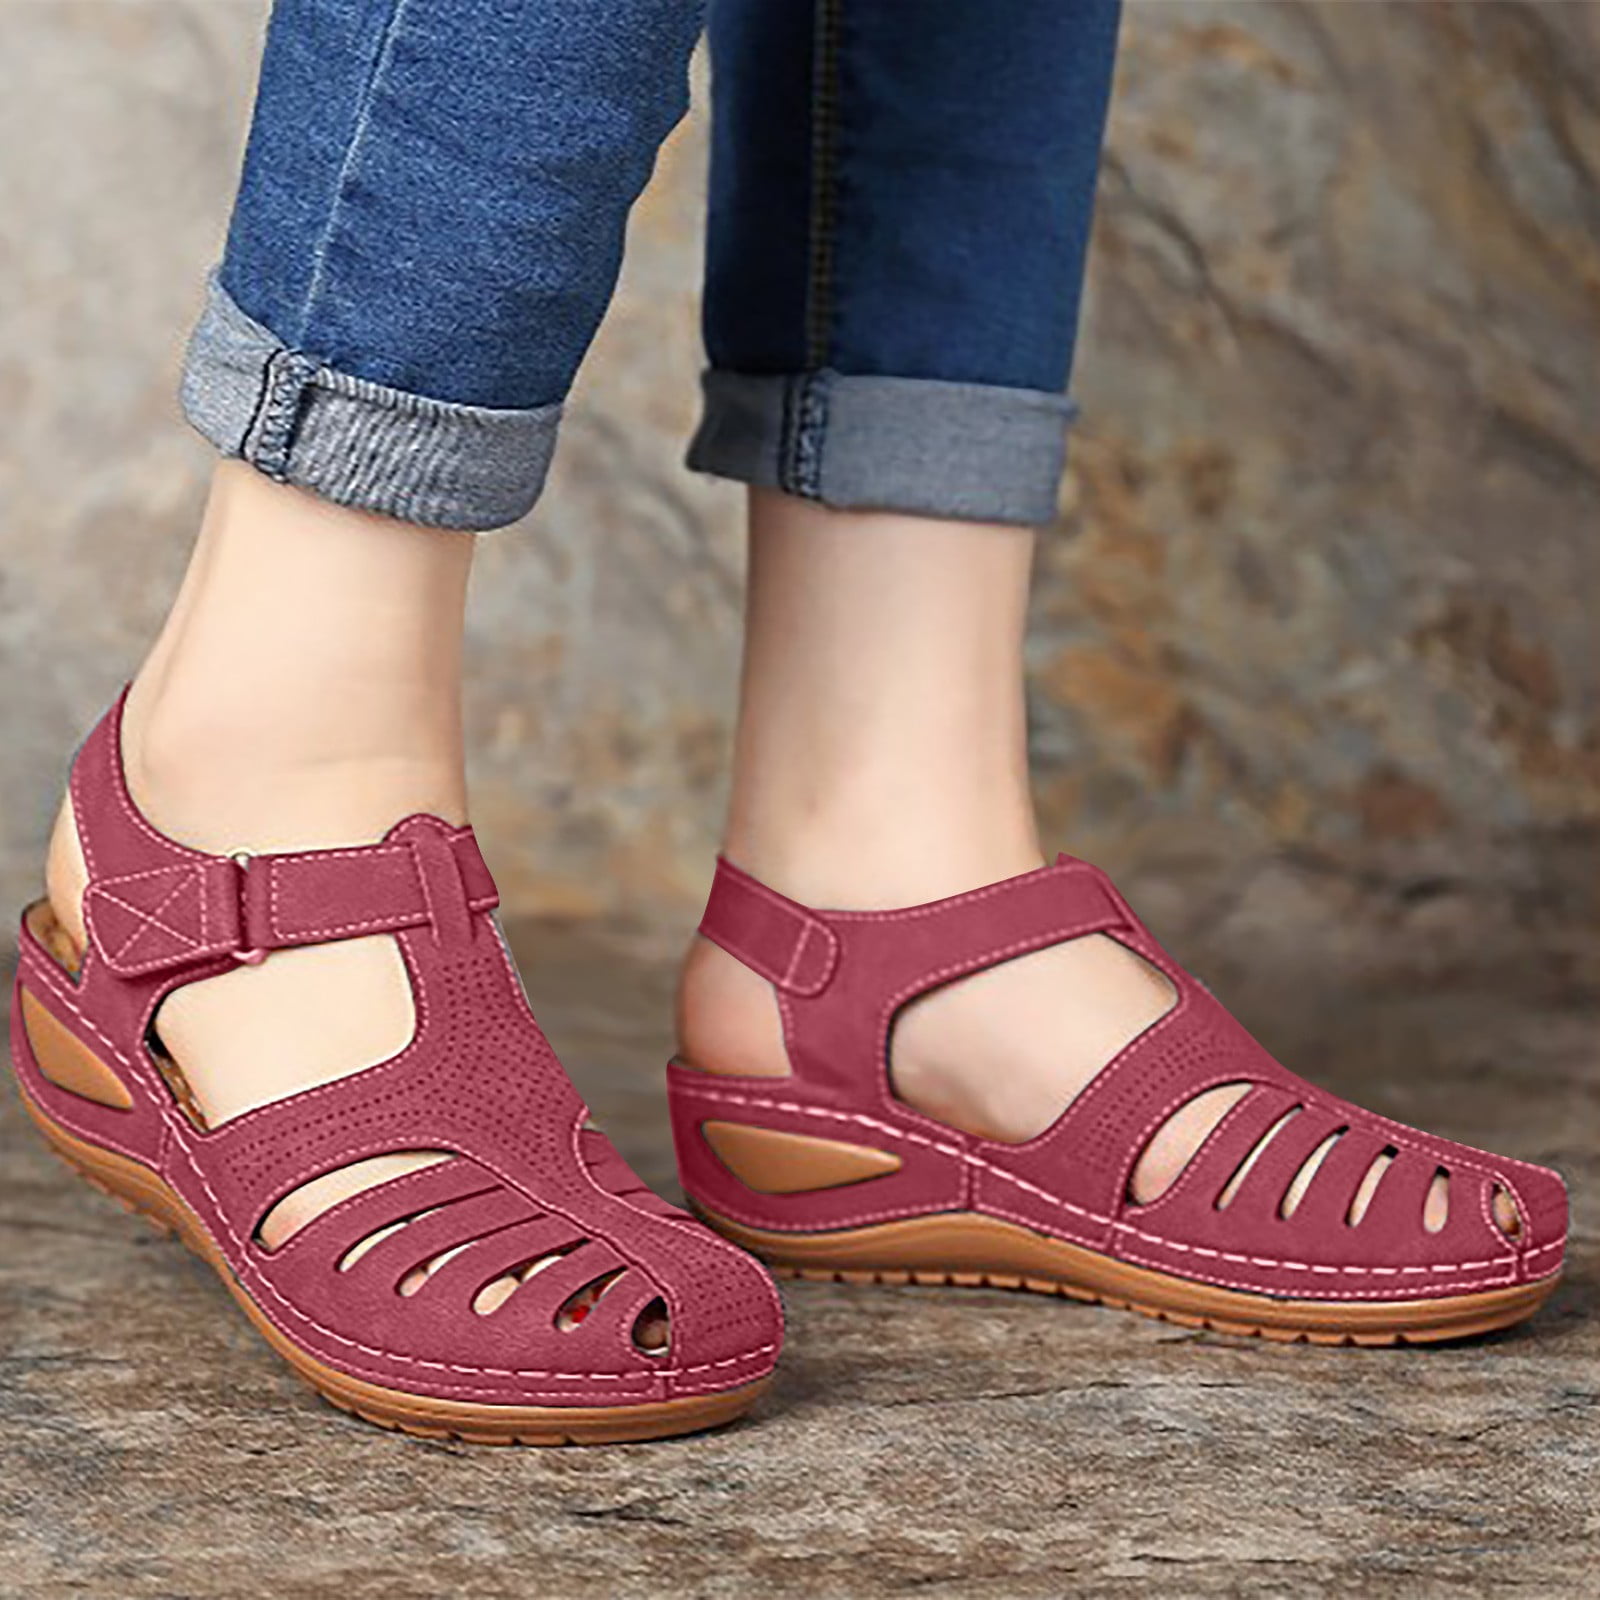 Hvyesh Closed Toe Sandals for Women Casual Summer Hollow Out Vintage ...